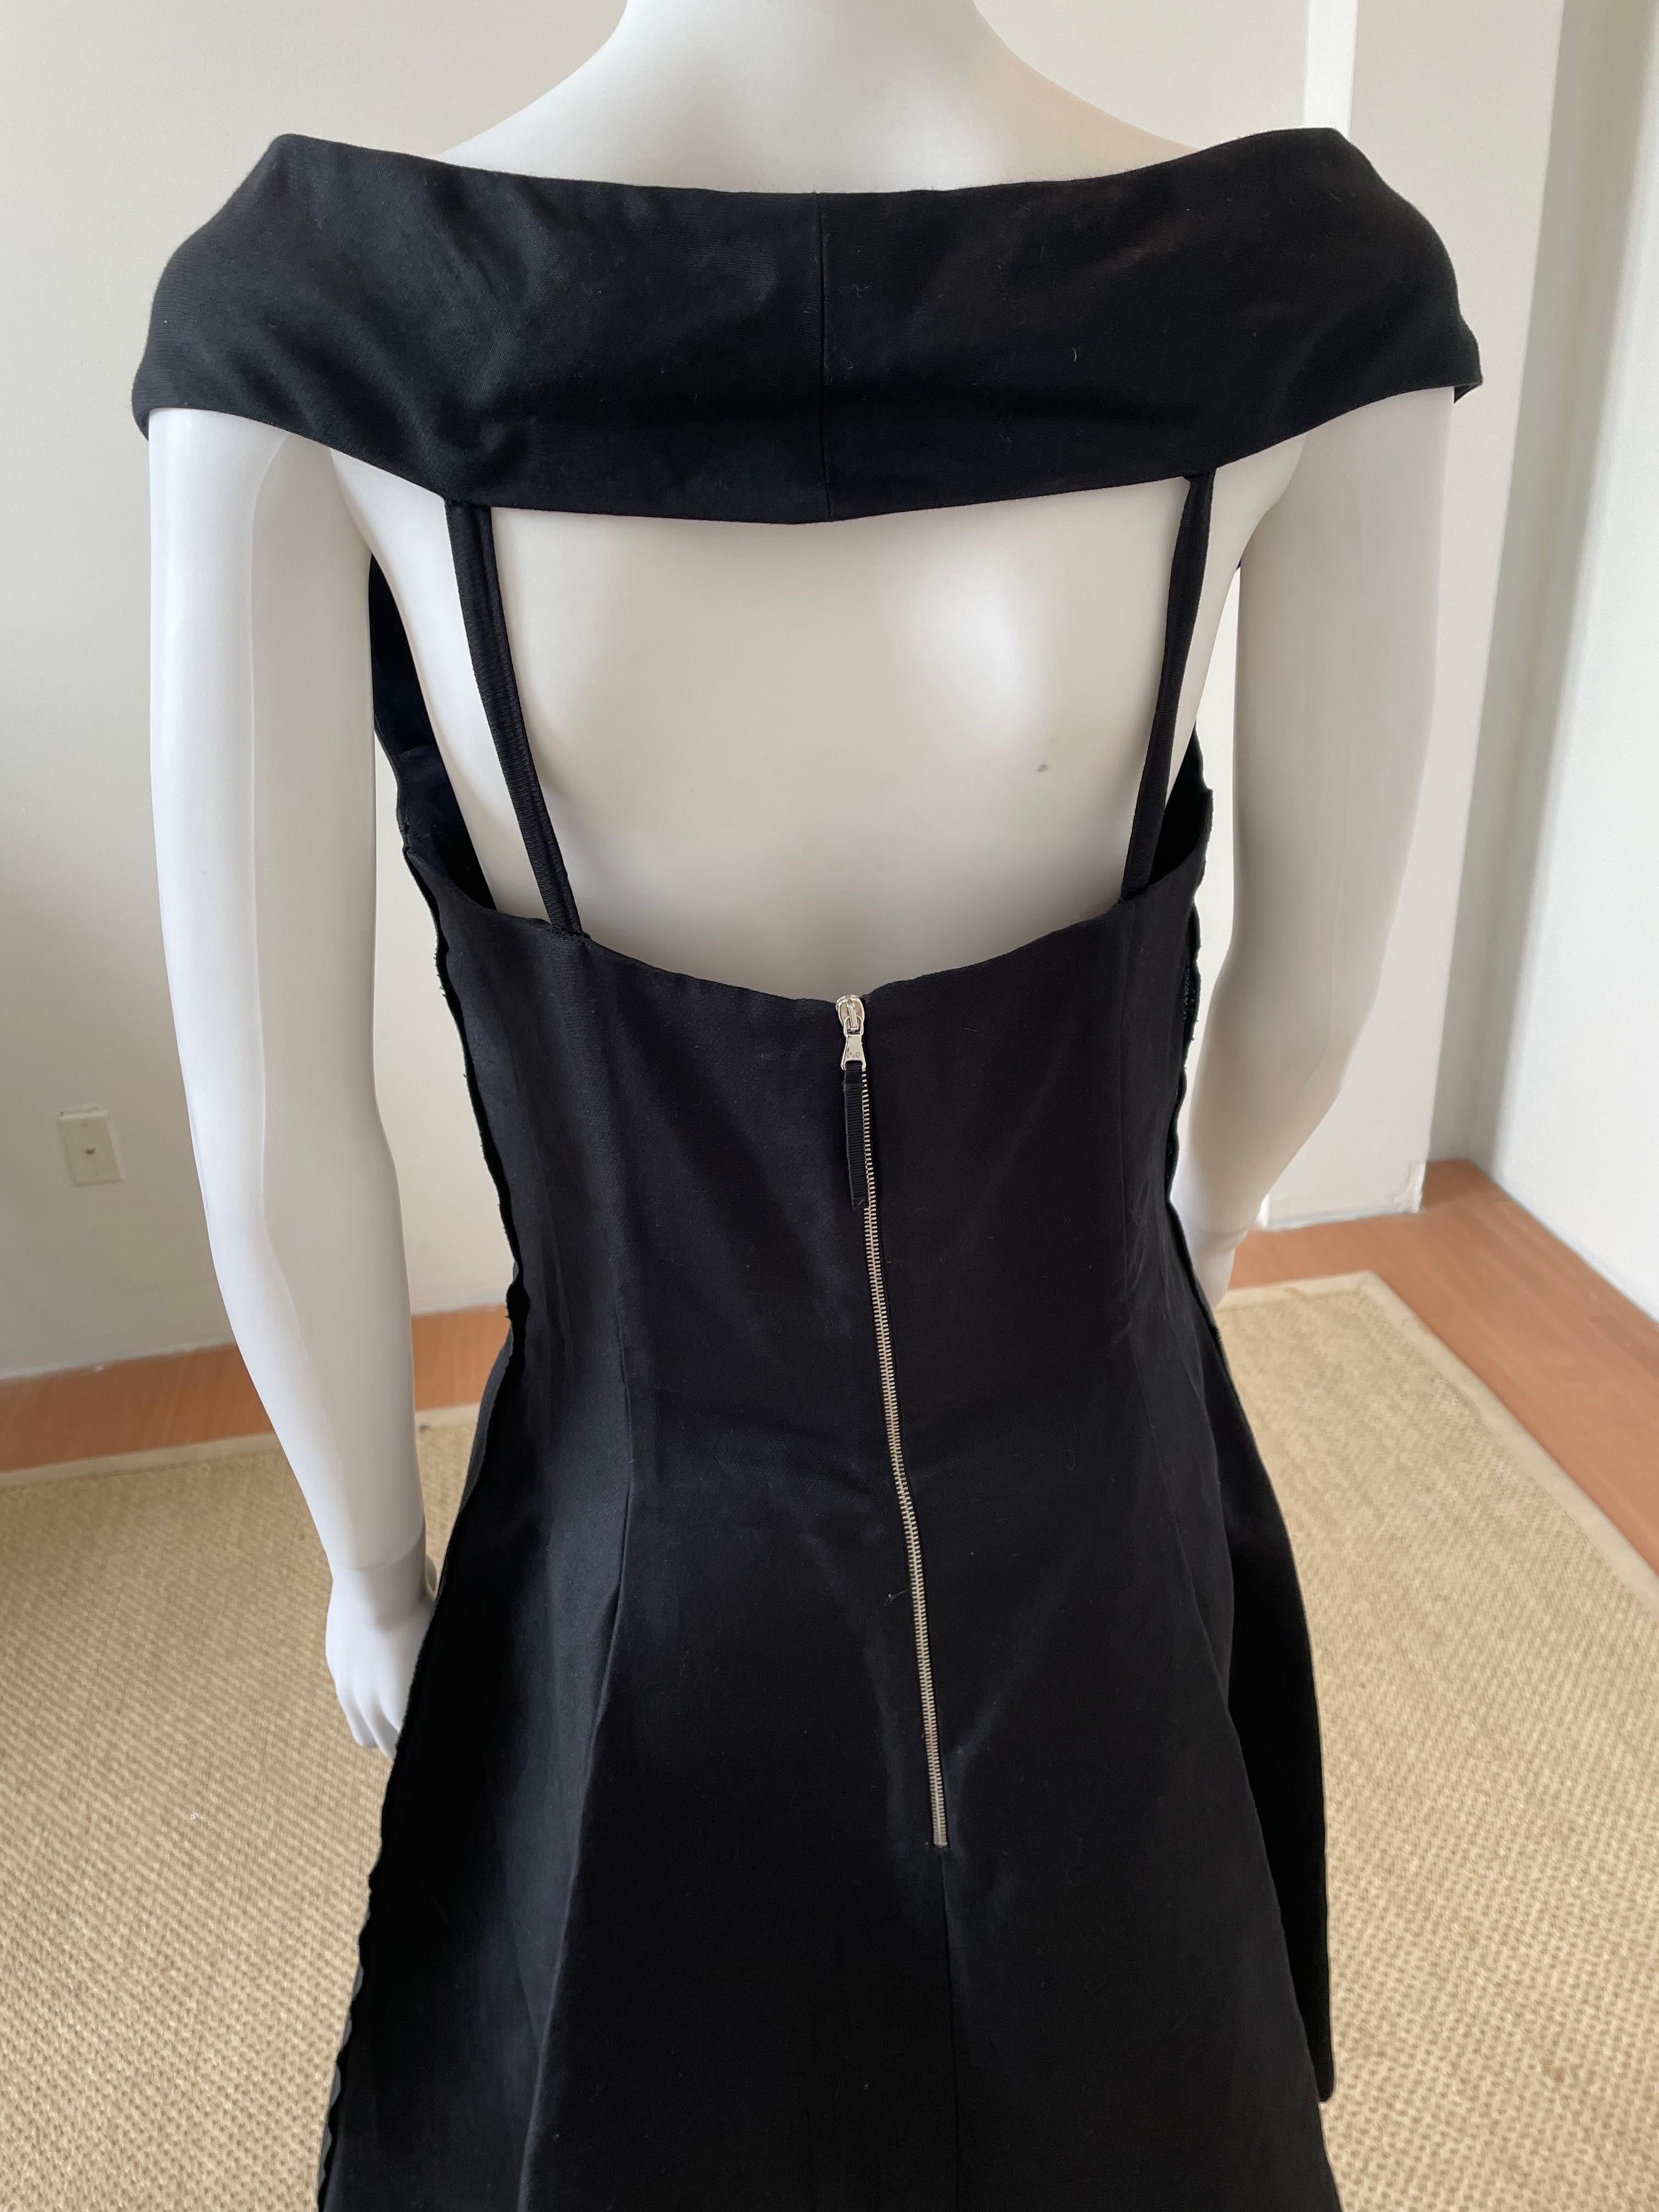 D&G V-Neck Structured Dress In Good Condition For Sale In Brooklyn, NY